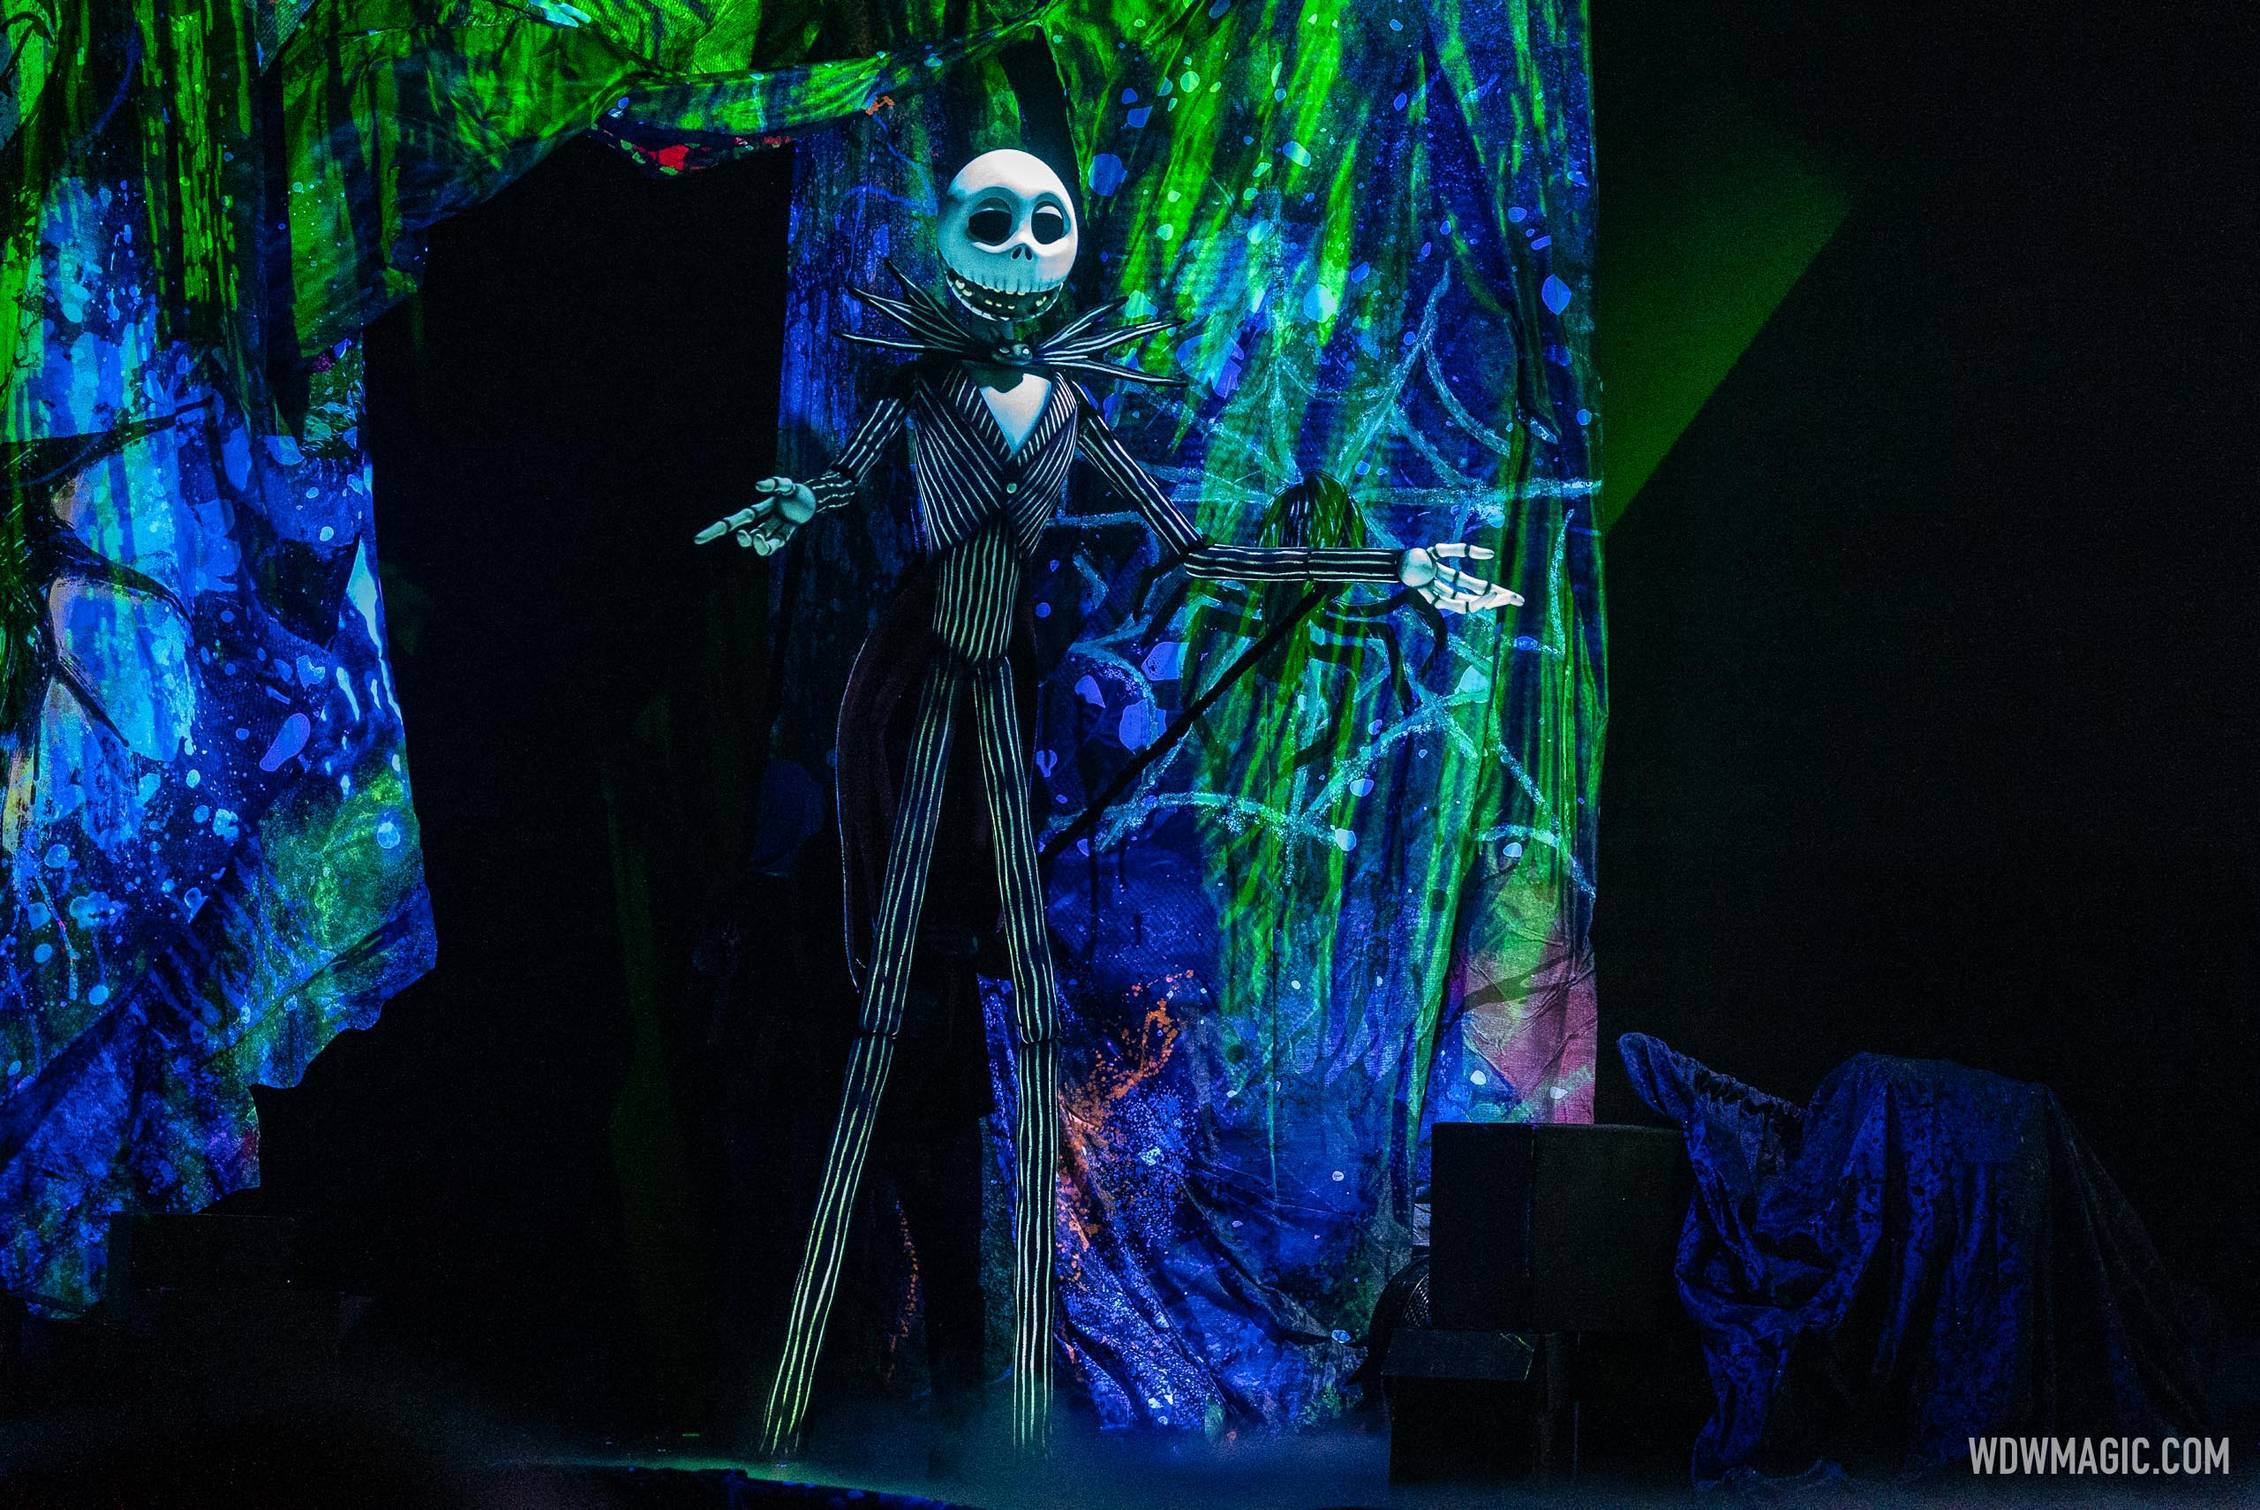 What's This? Tim Burton's The Nightmare Before Christmas Sing-Along show